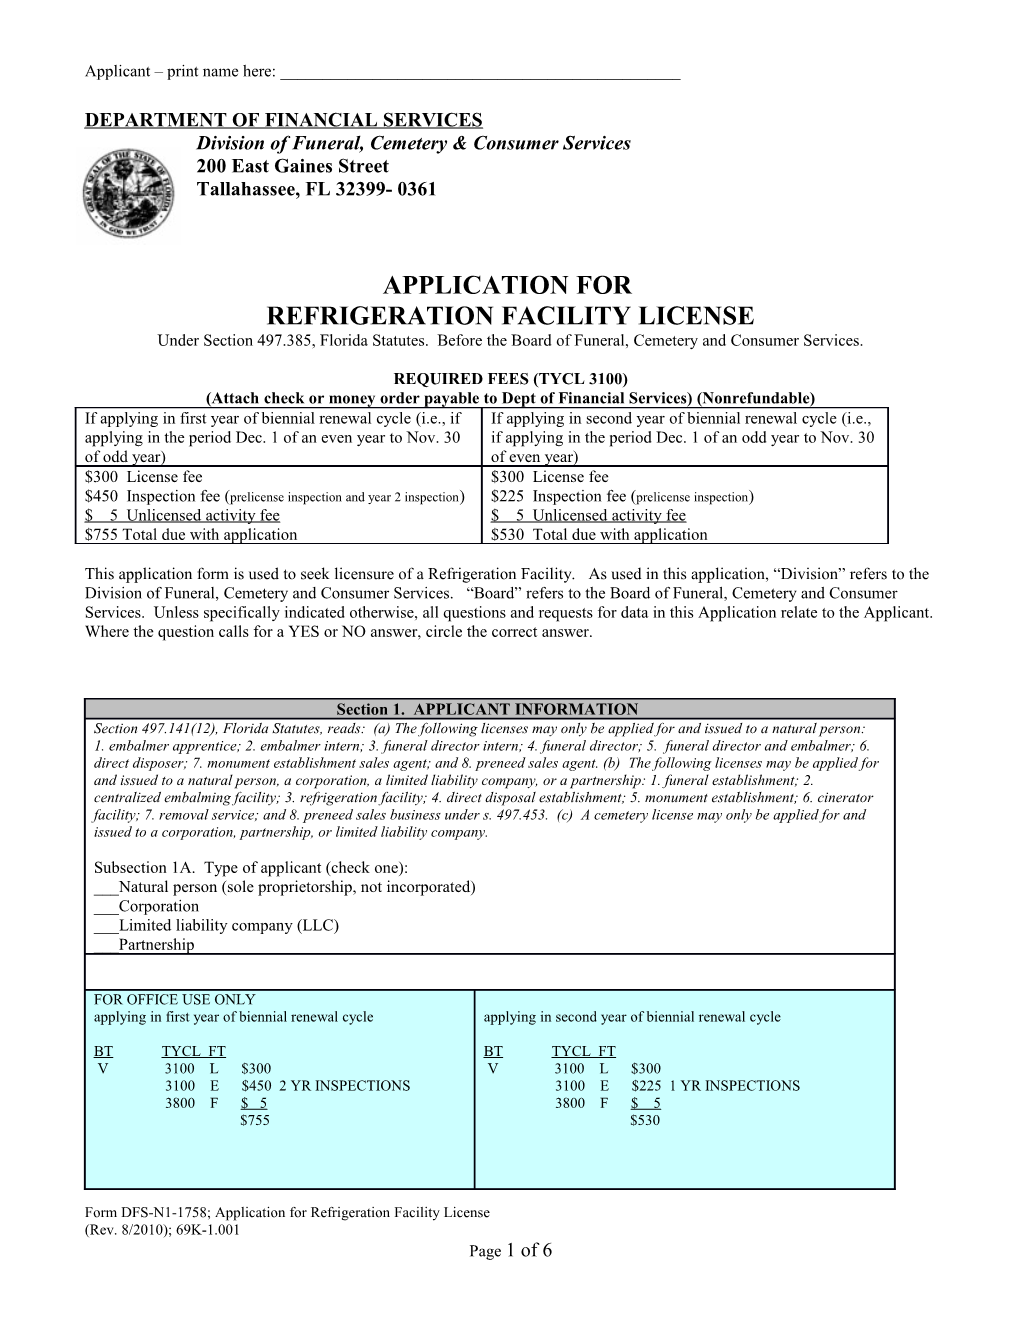 Application for Refrigeration Facility License